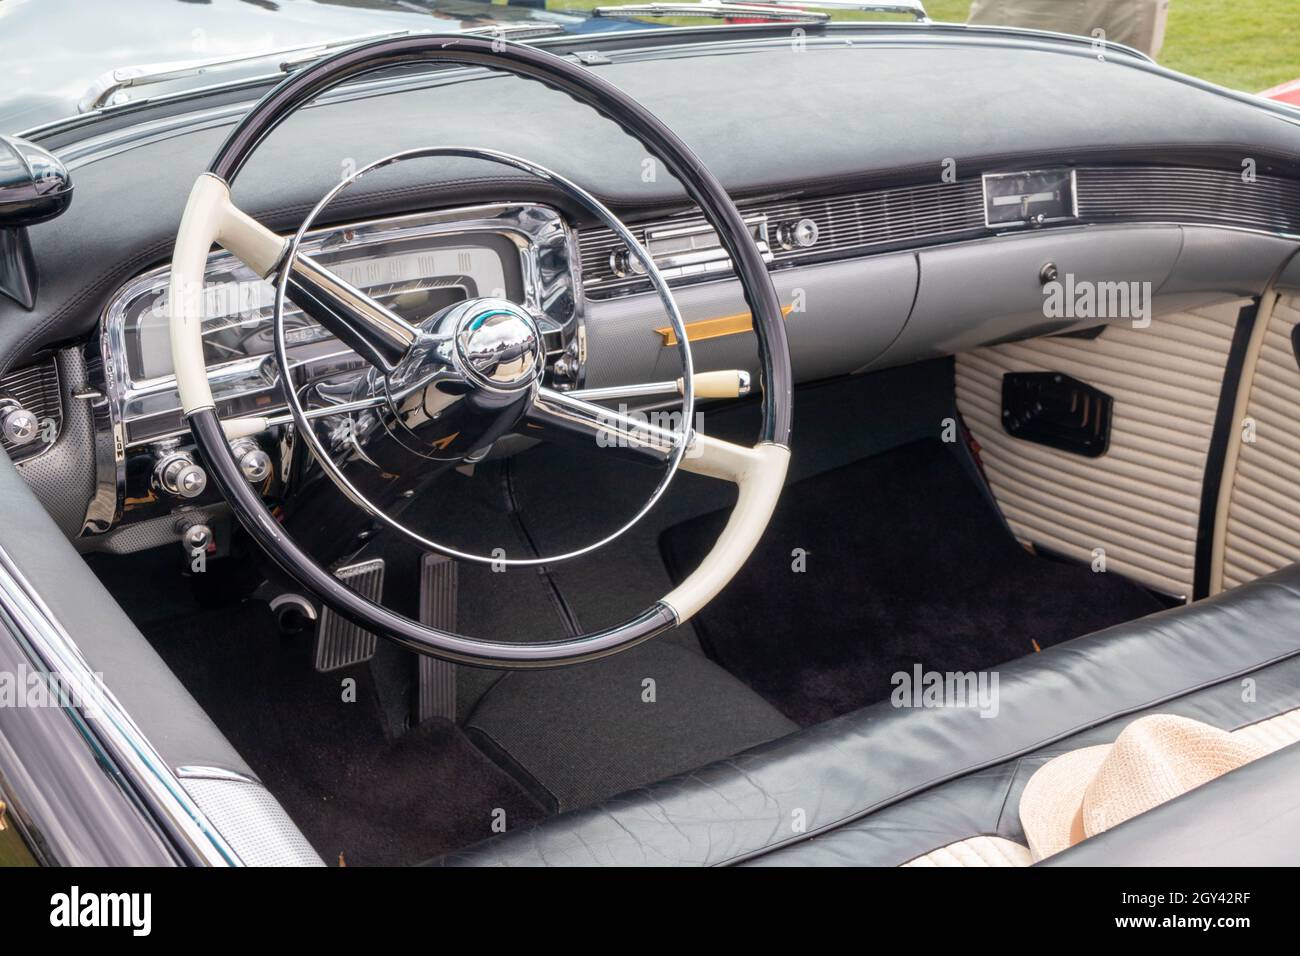 Naphill, England - August 29th 2021: A black Series 62 Cadillac Convertible. The cars were built between 1954 and 1956. Stock Photo